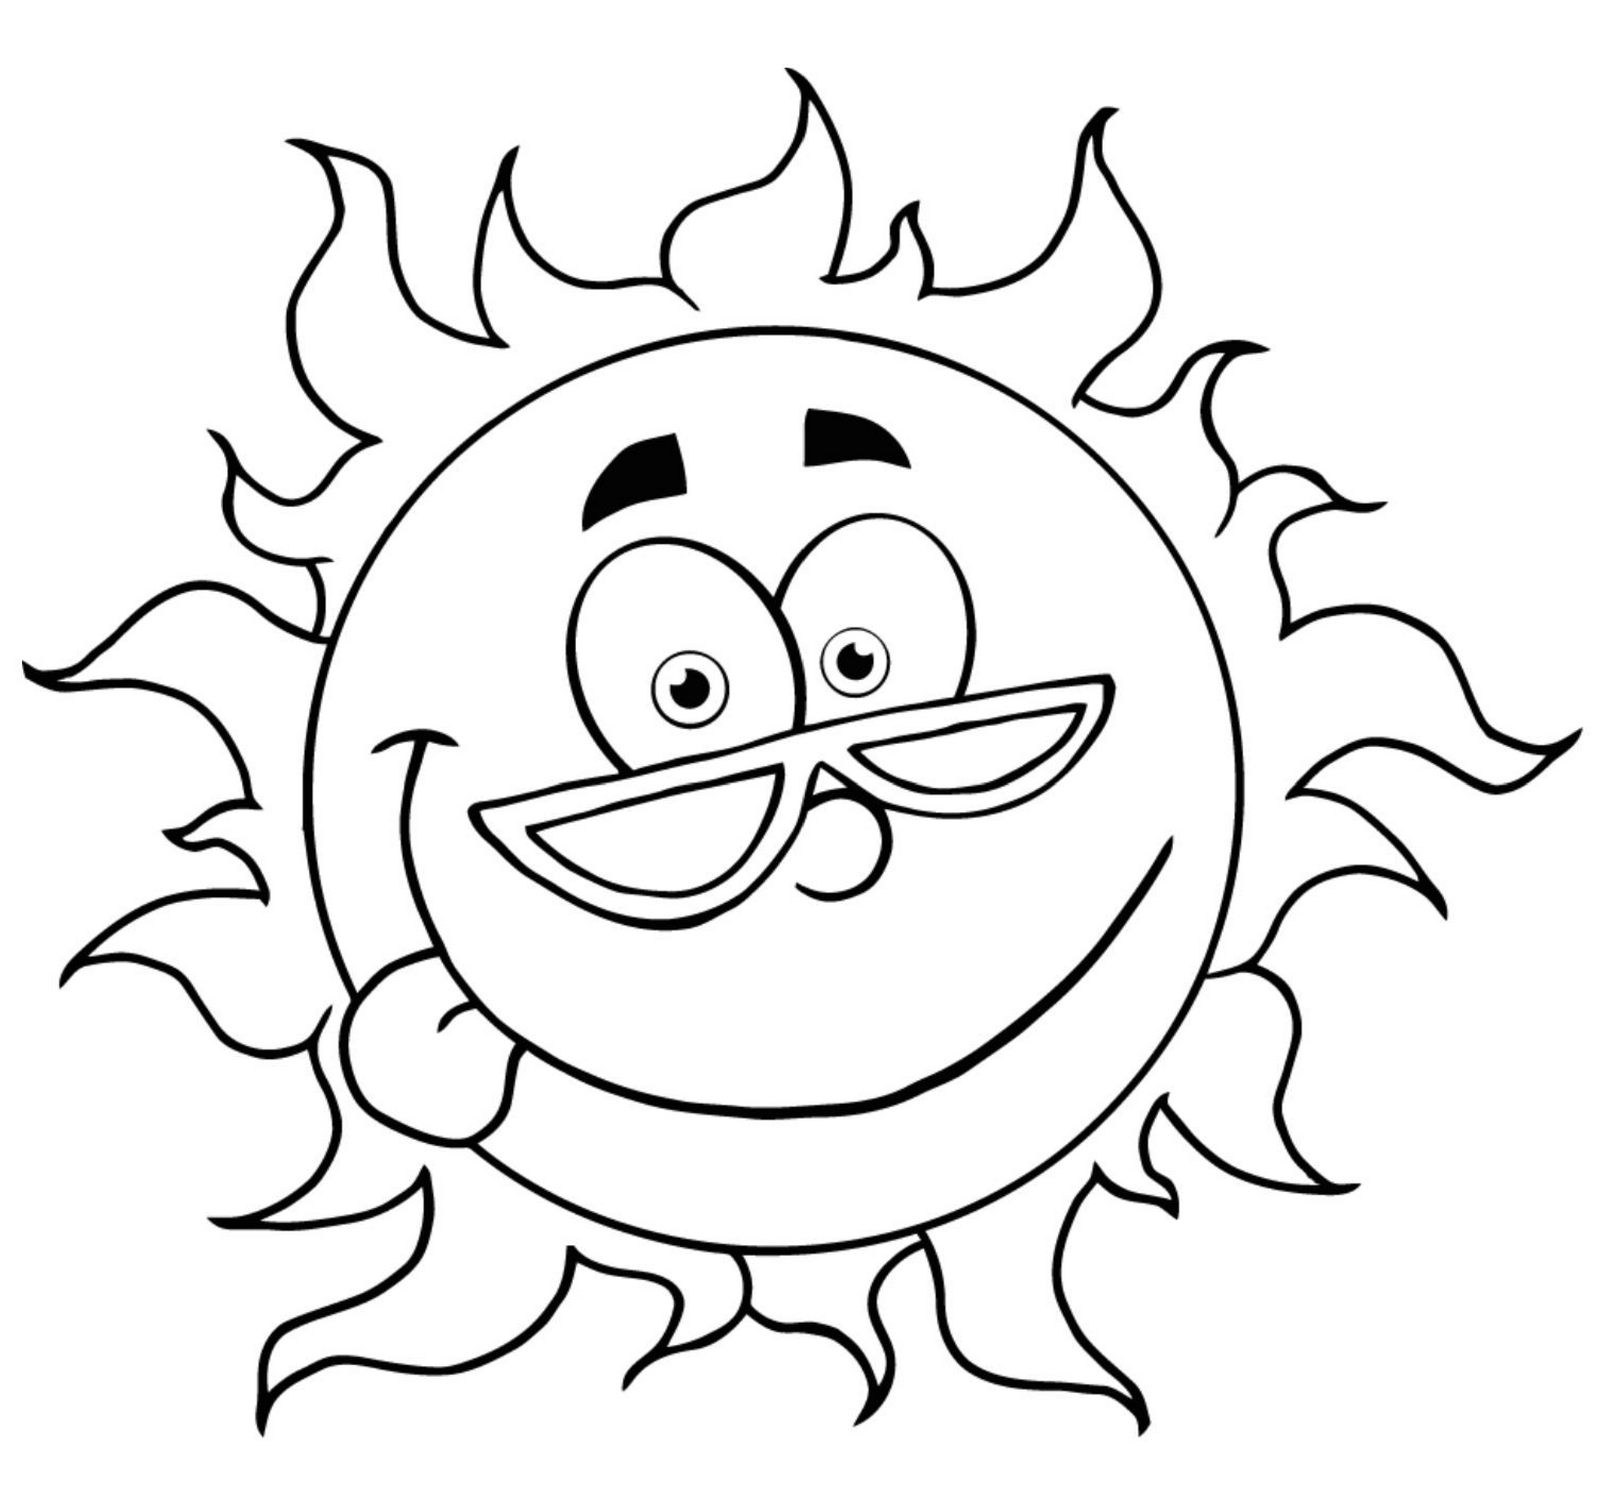 printable modist sun coloring sheets for little angles